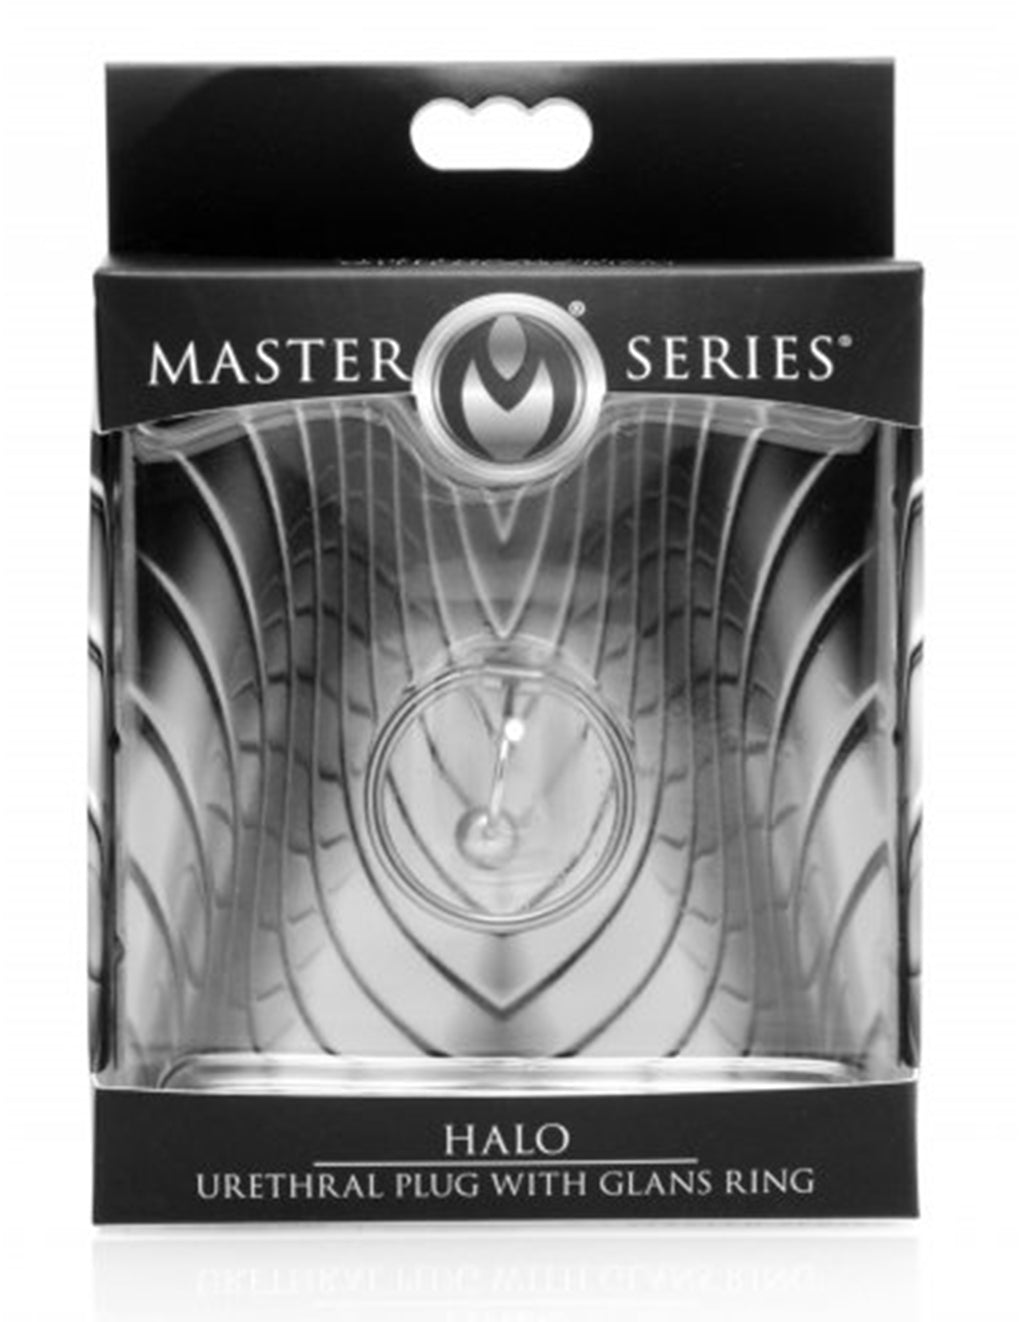 Master Series Halo Urethral Plug With Glans Ring- Package